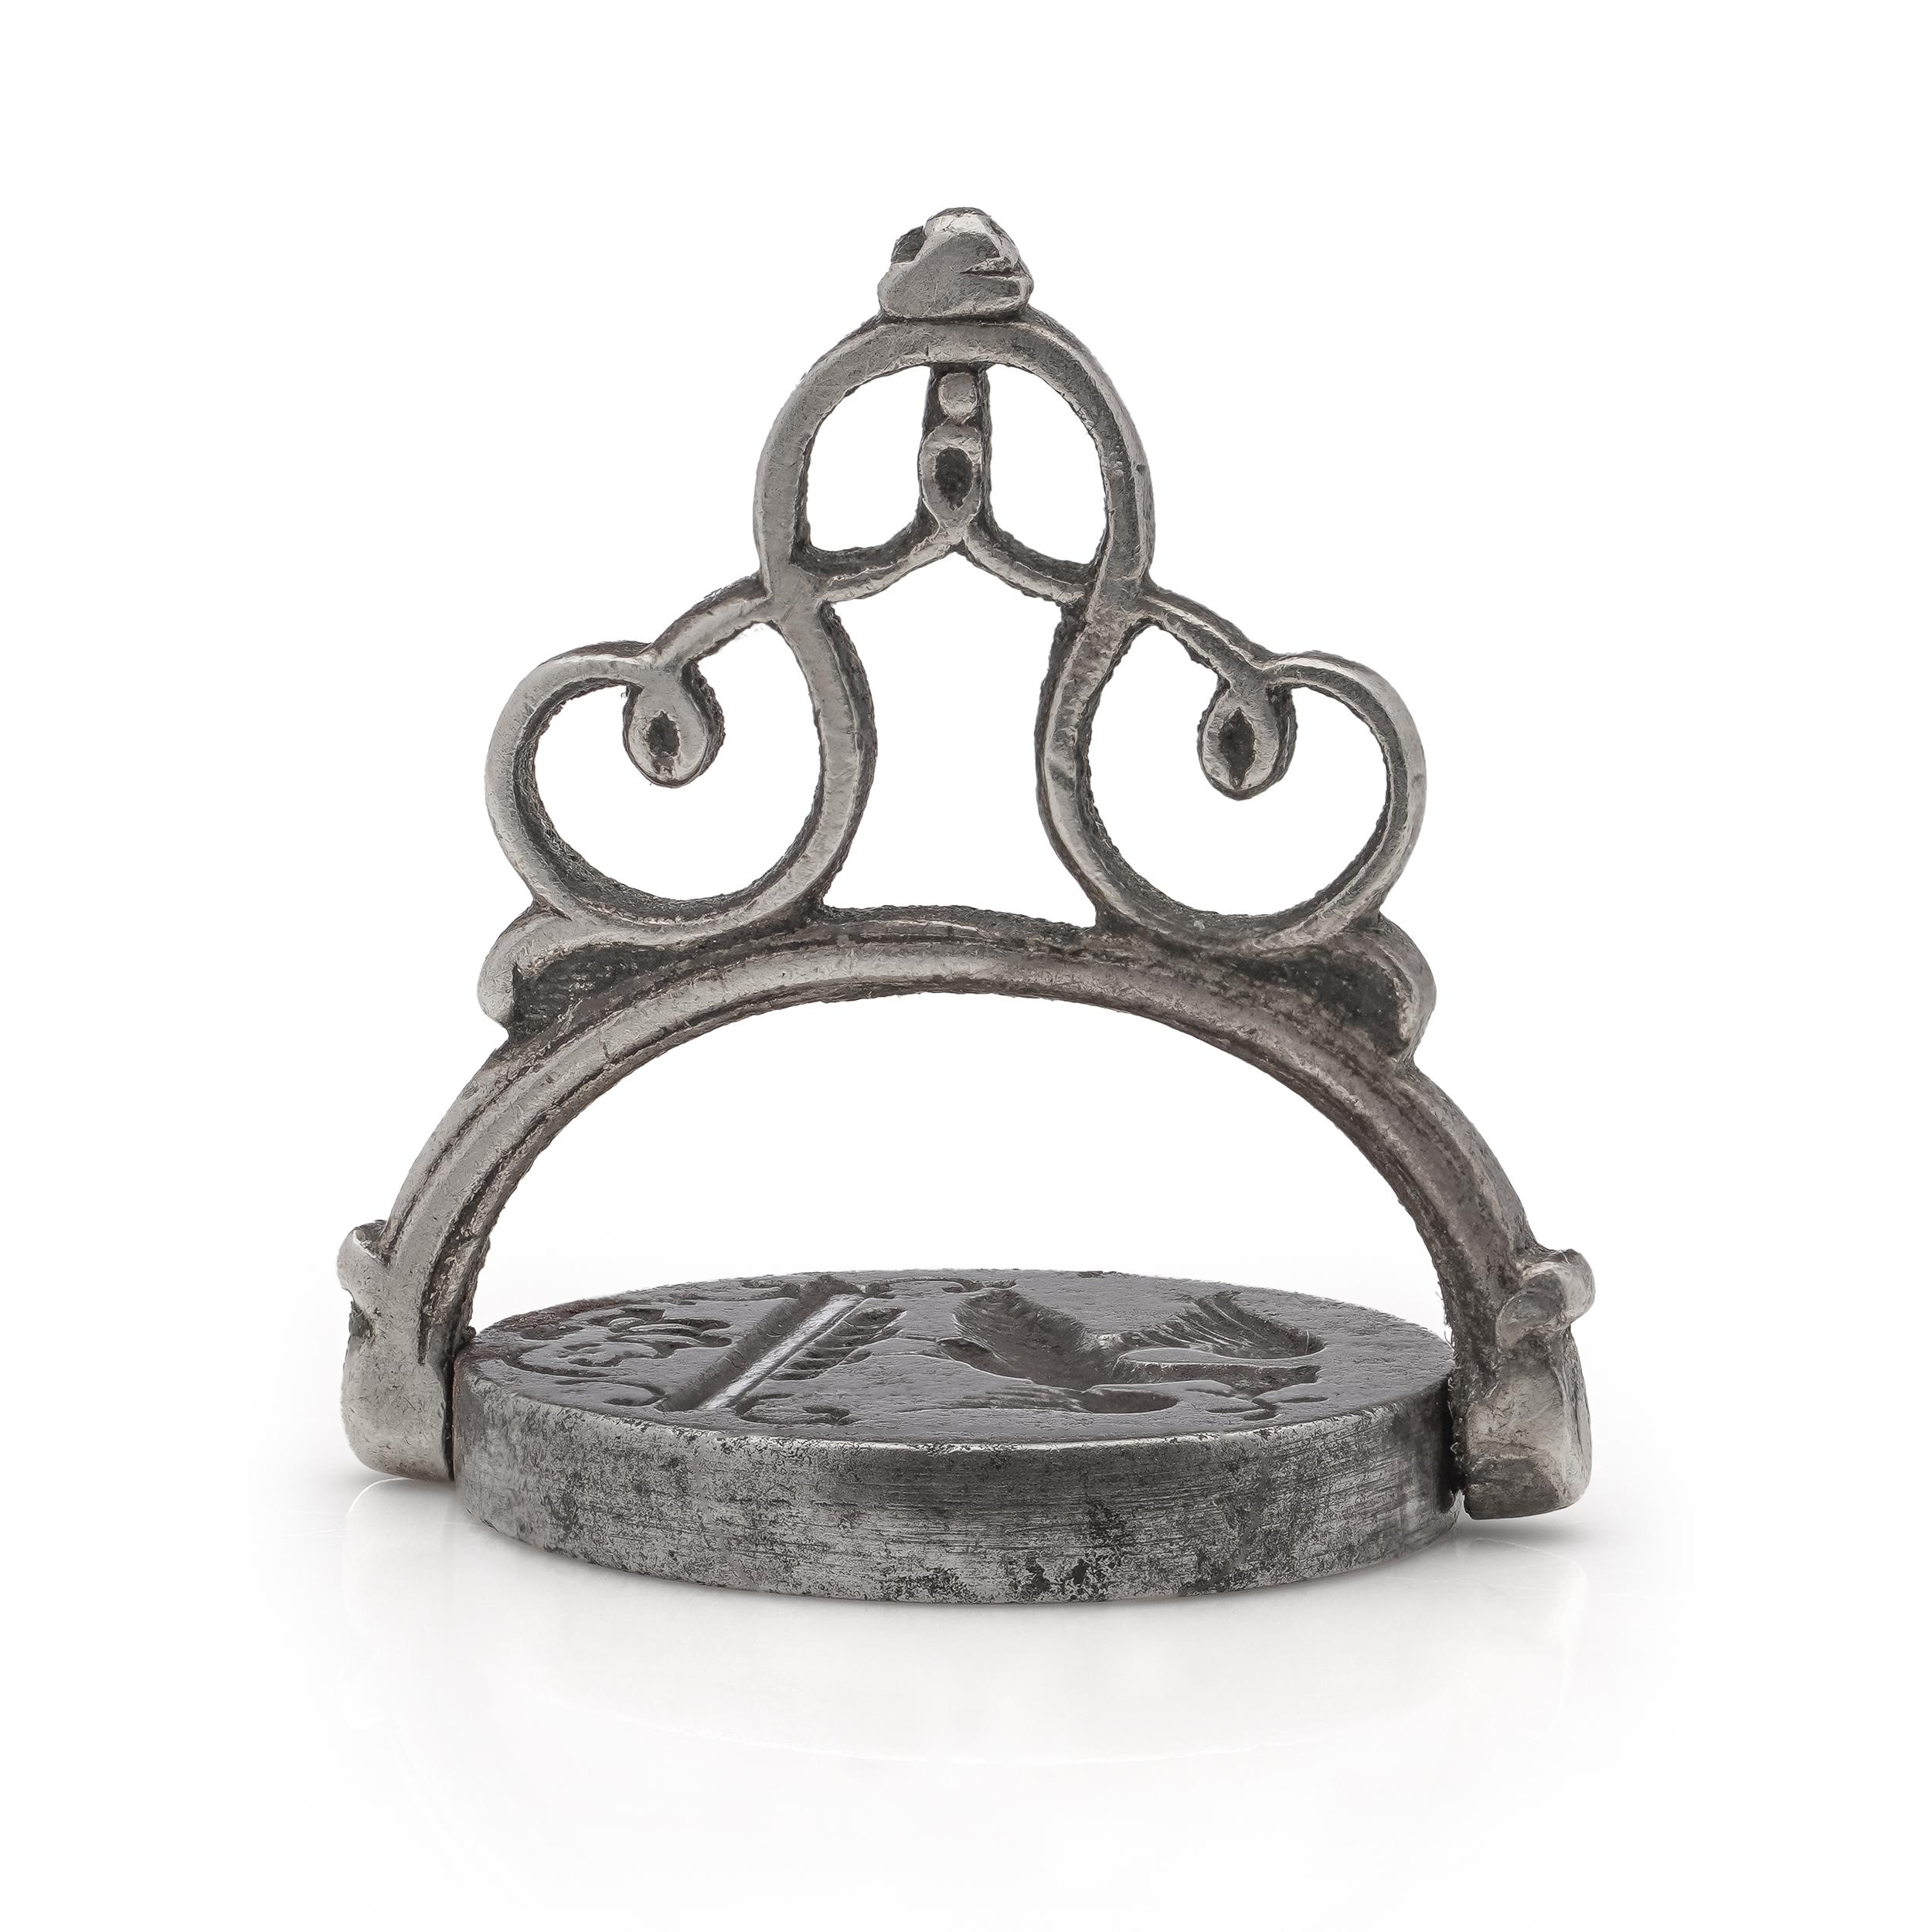 Antique 17th-century Silver and iron seal fob/pendant.

O side with an inscription with archaic English words saying '' Bethouf faitful unto death '' -  
